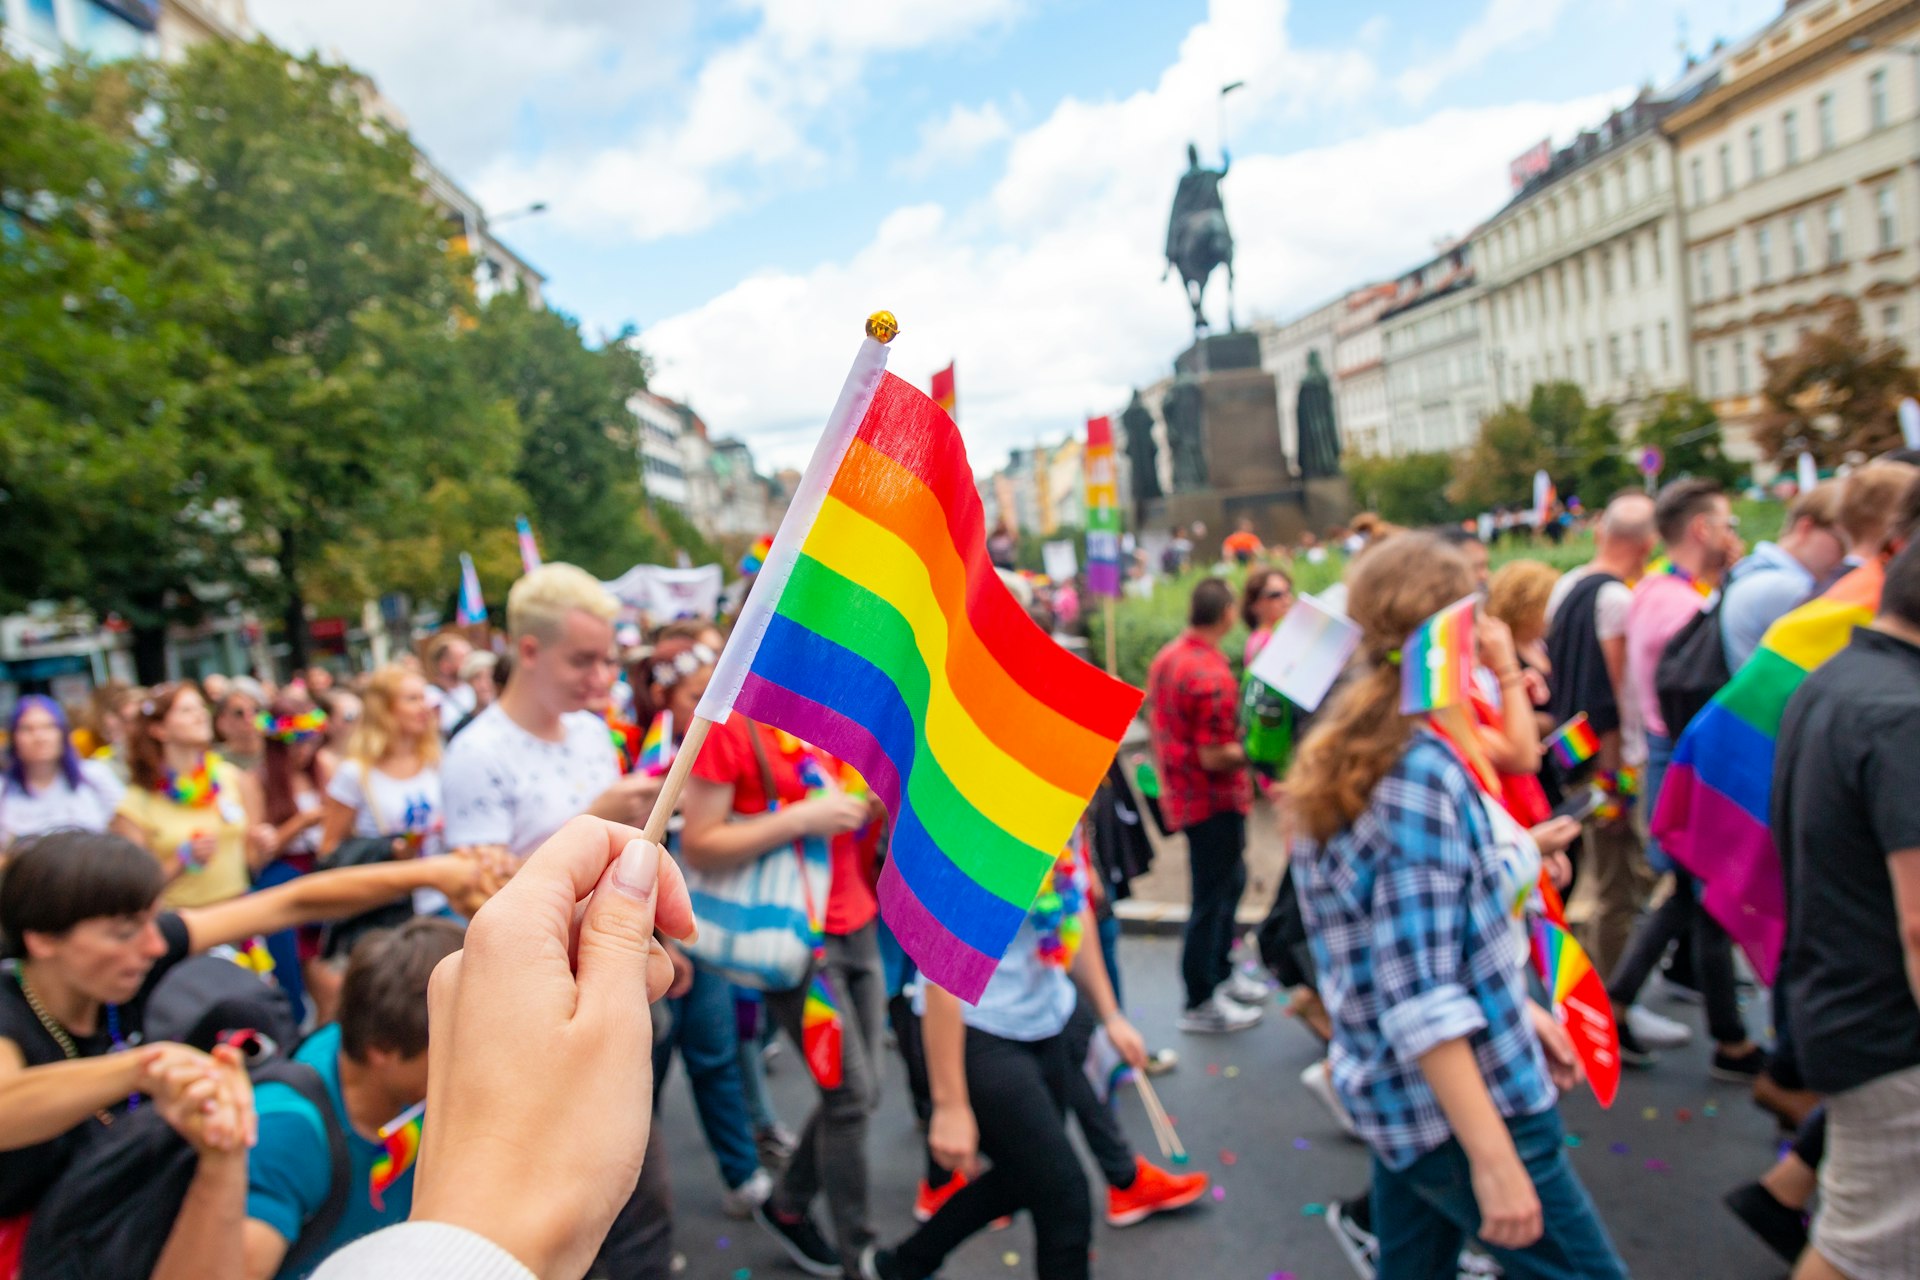 A hand holds up a rainbow flag as a parade of people walk past a large statue of a man on horseback